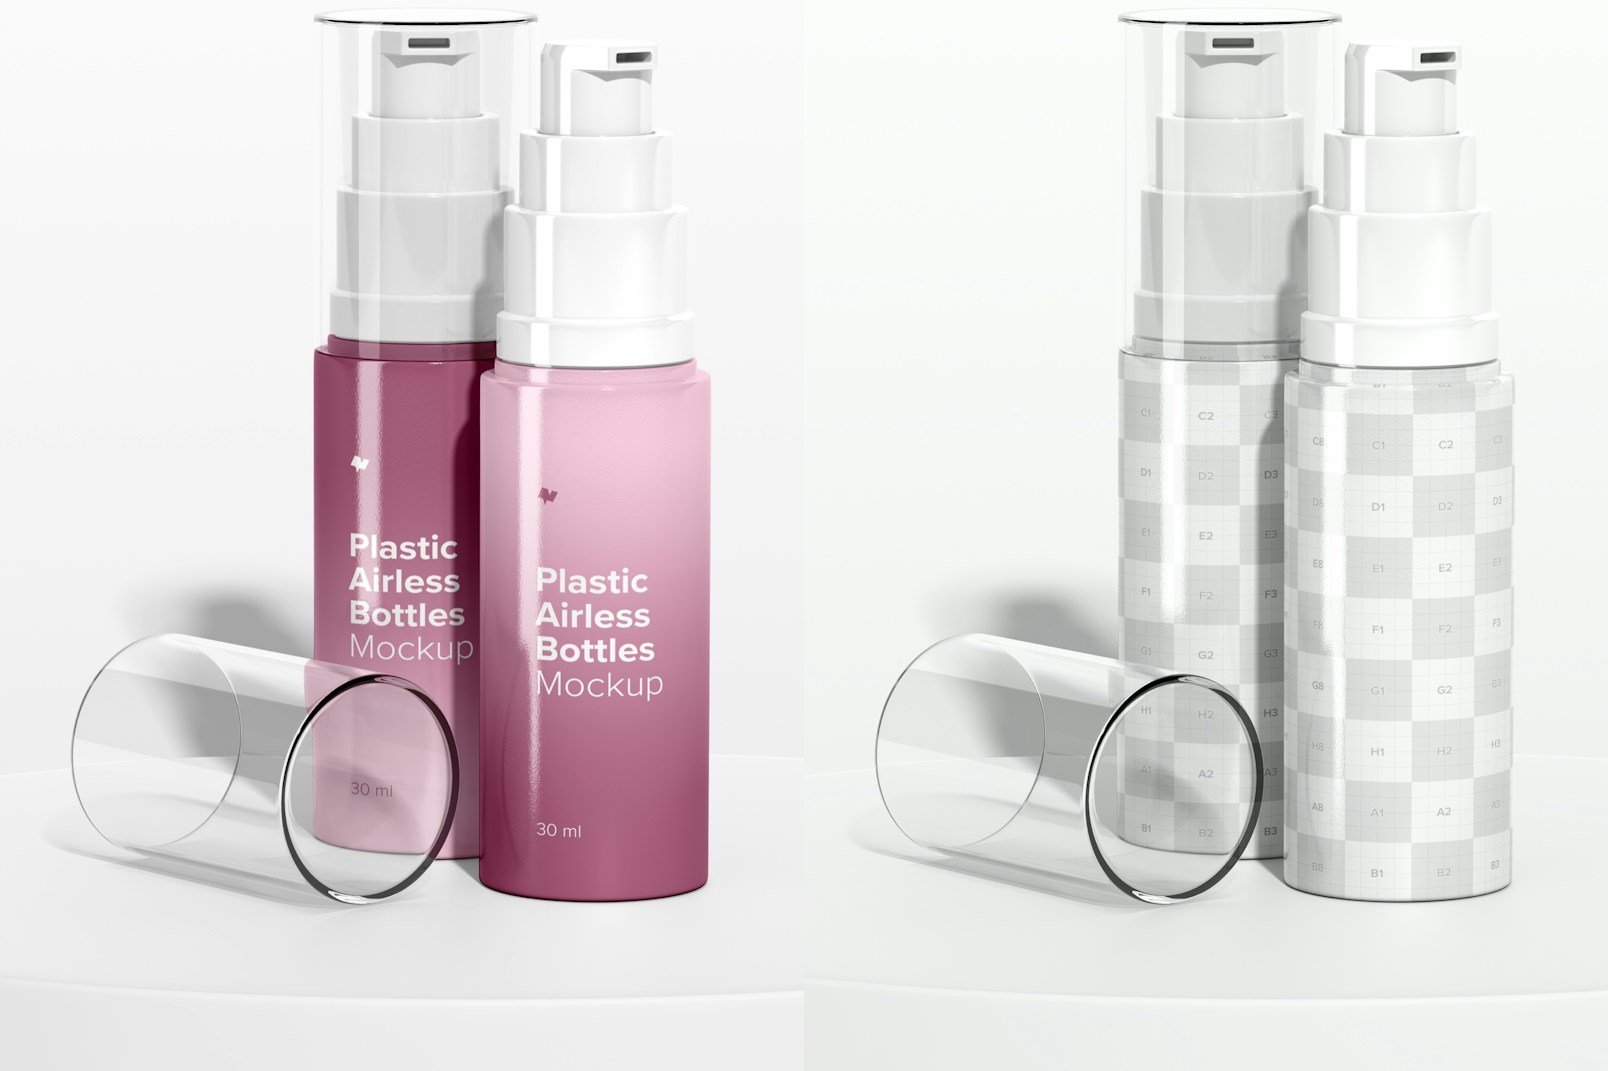 Plastic Airless Bottles Mockup, Opened and Closed